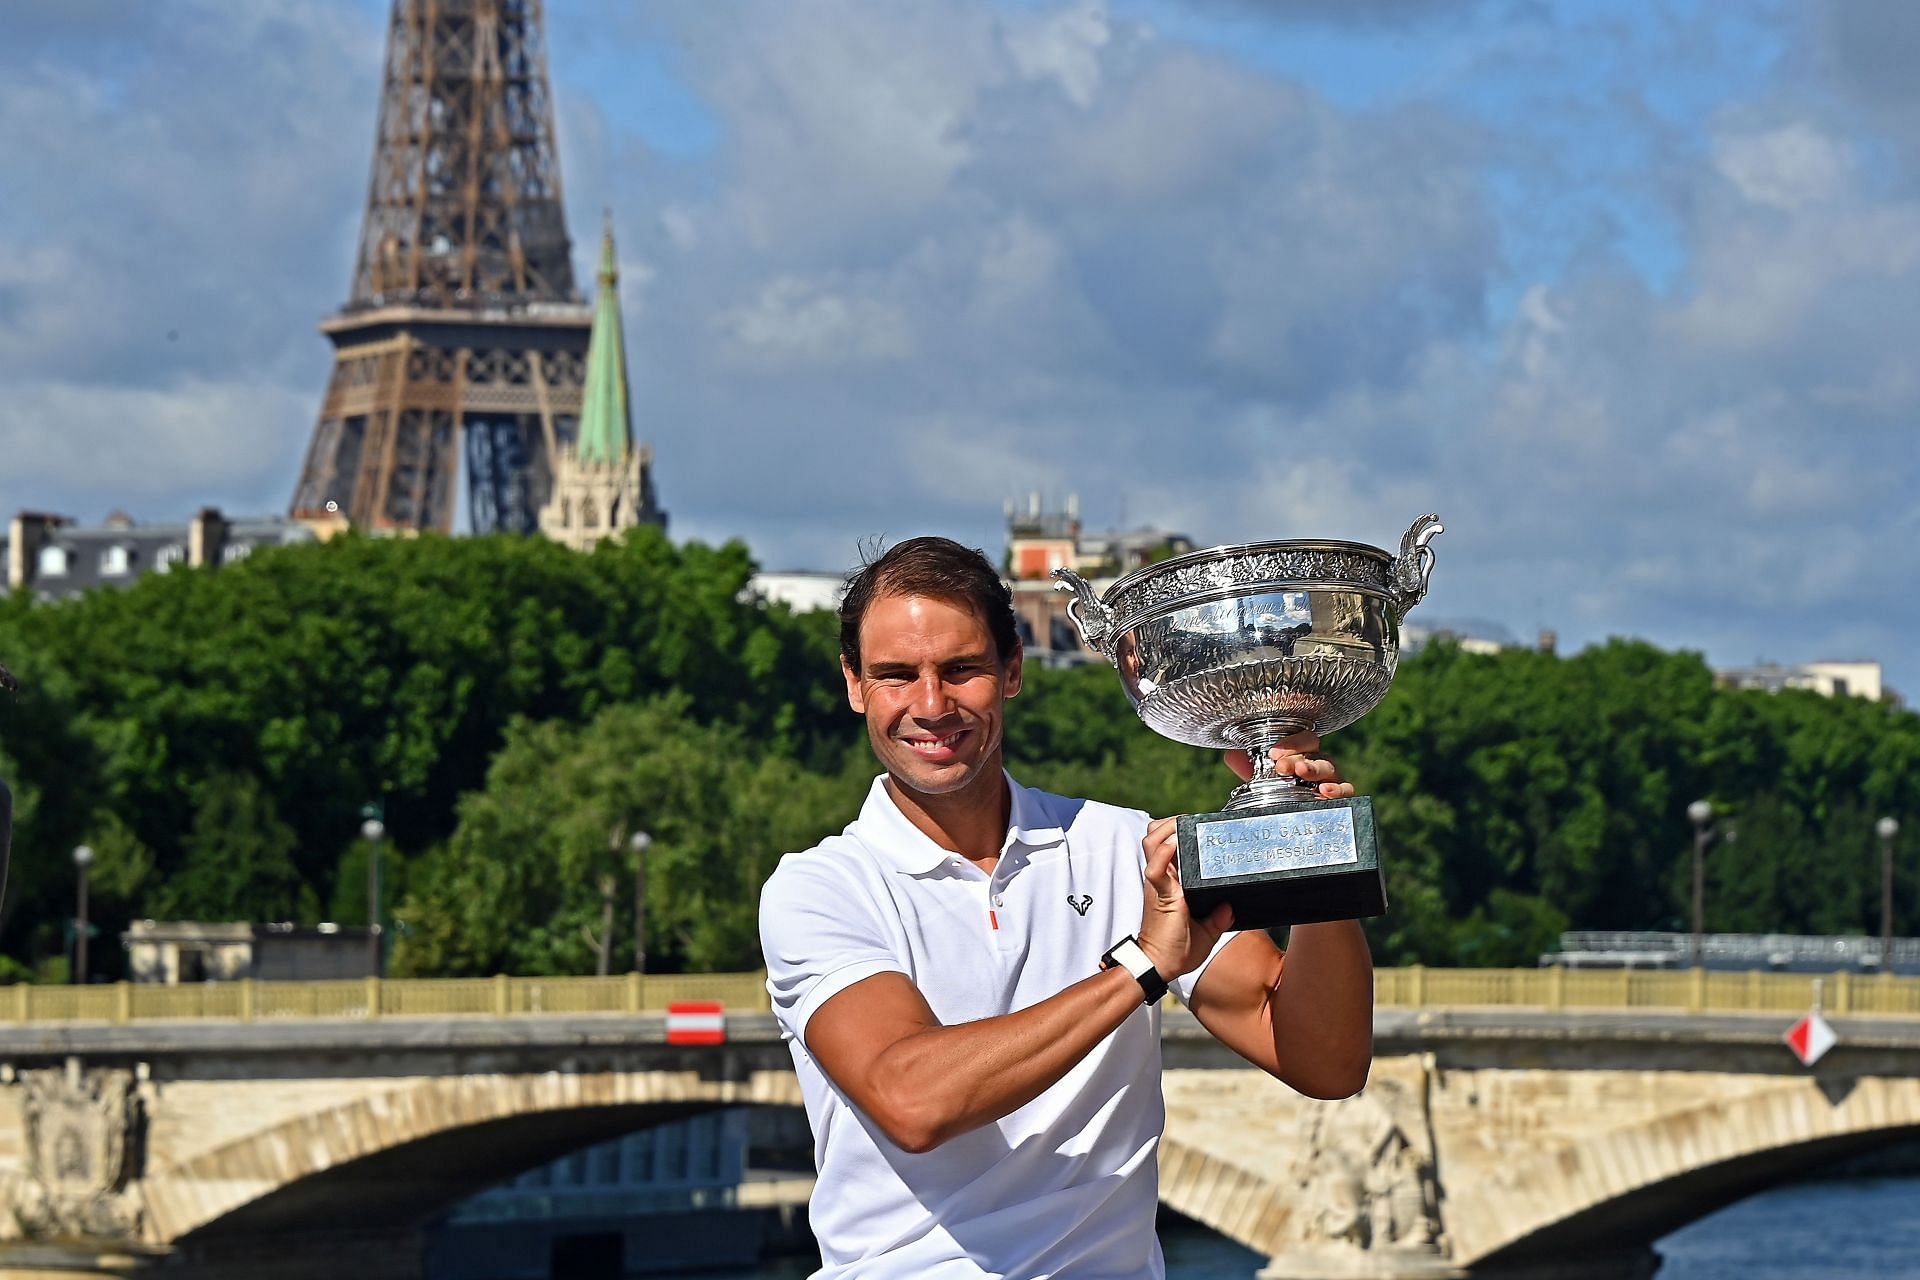 Rafael Nadal won the Australian Open and the French Open this year